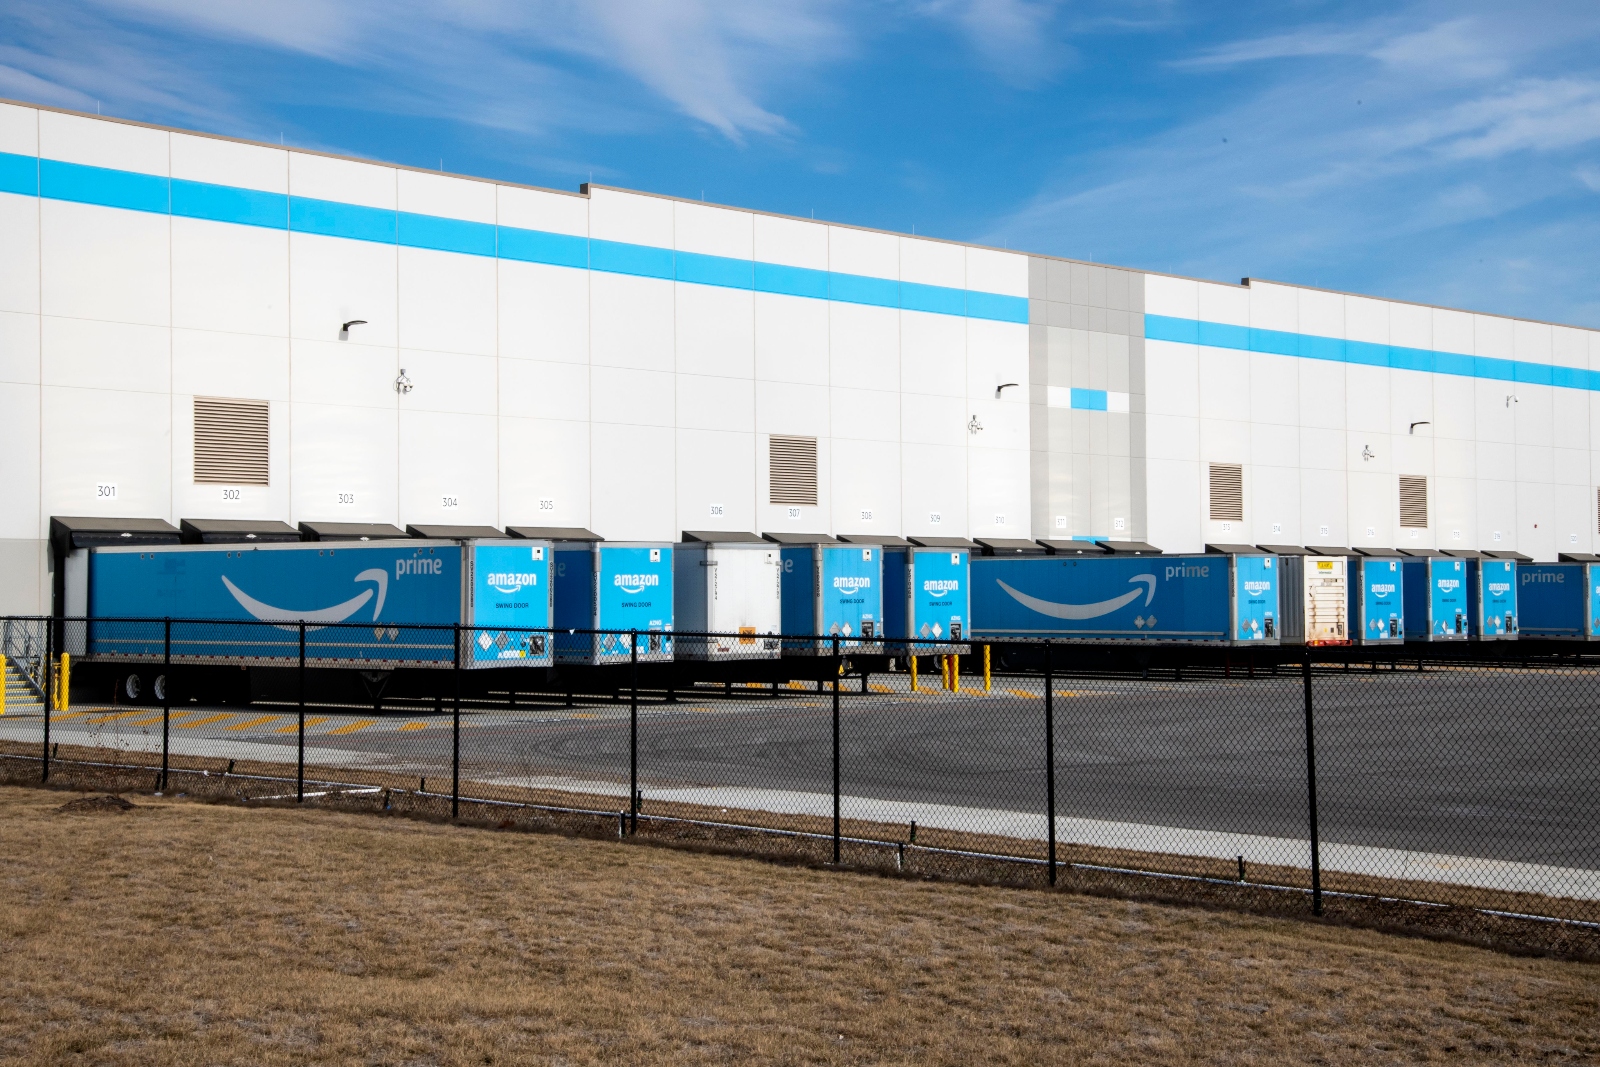 The outside of a white warehouse building with trucks bearing Amazon Prime's branding and logo lined to load from it